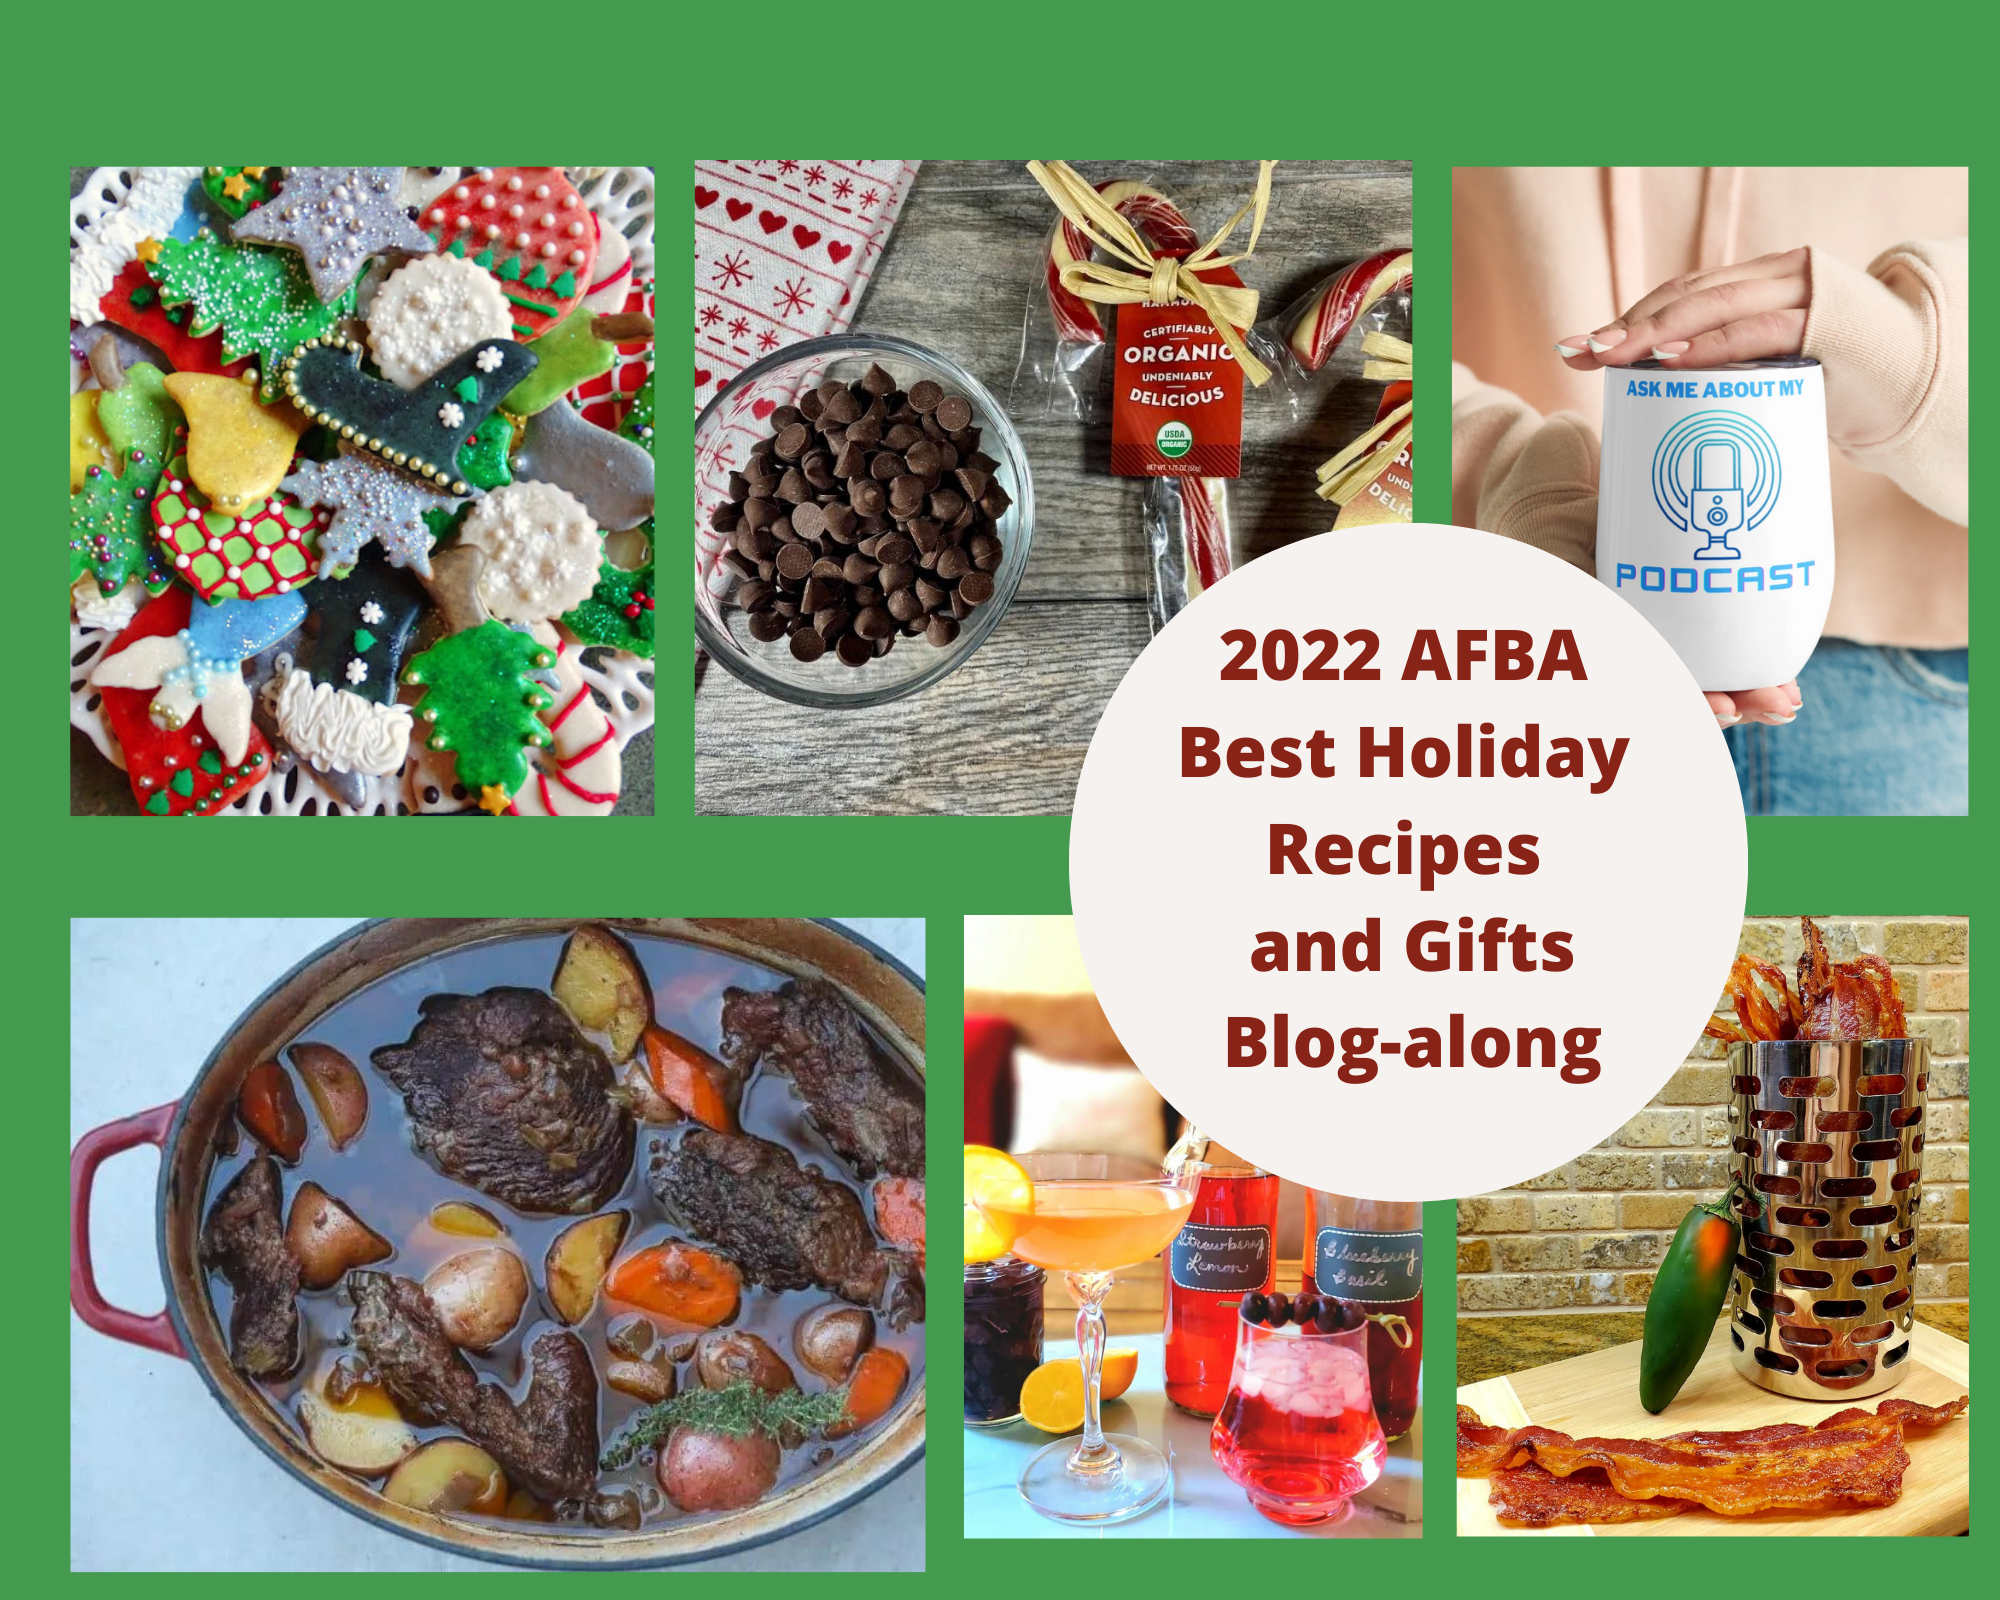 Best Holiday Recipes and Gift Ideas by Austin Food Bloggers